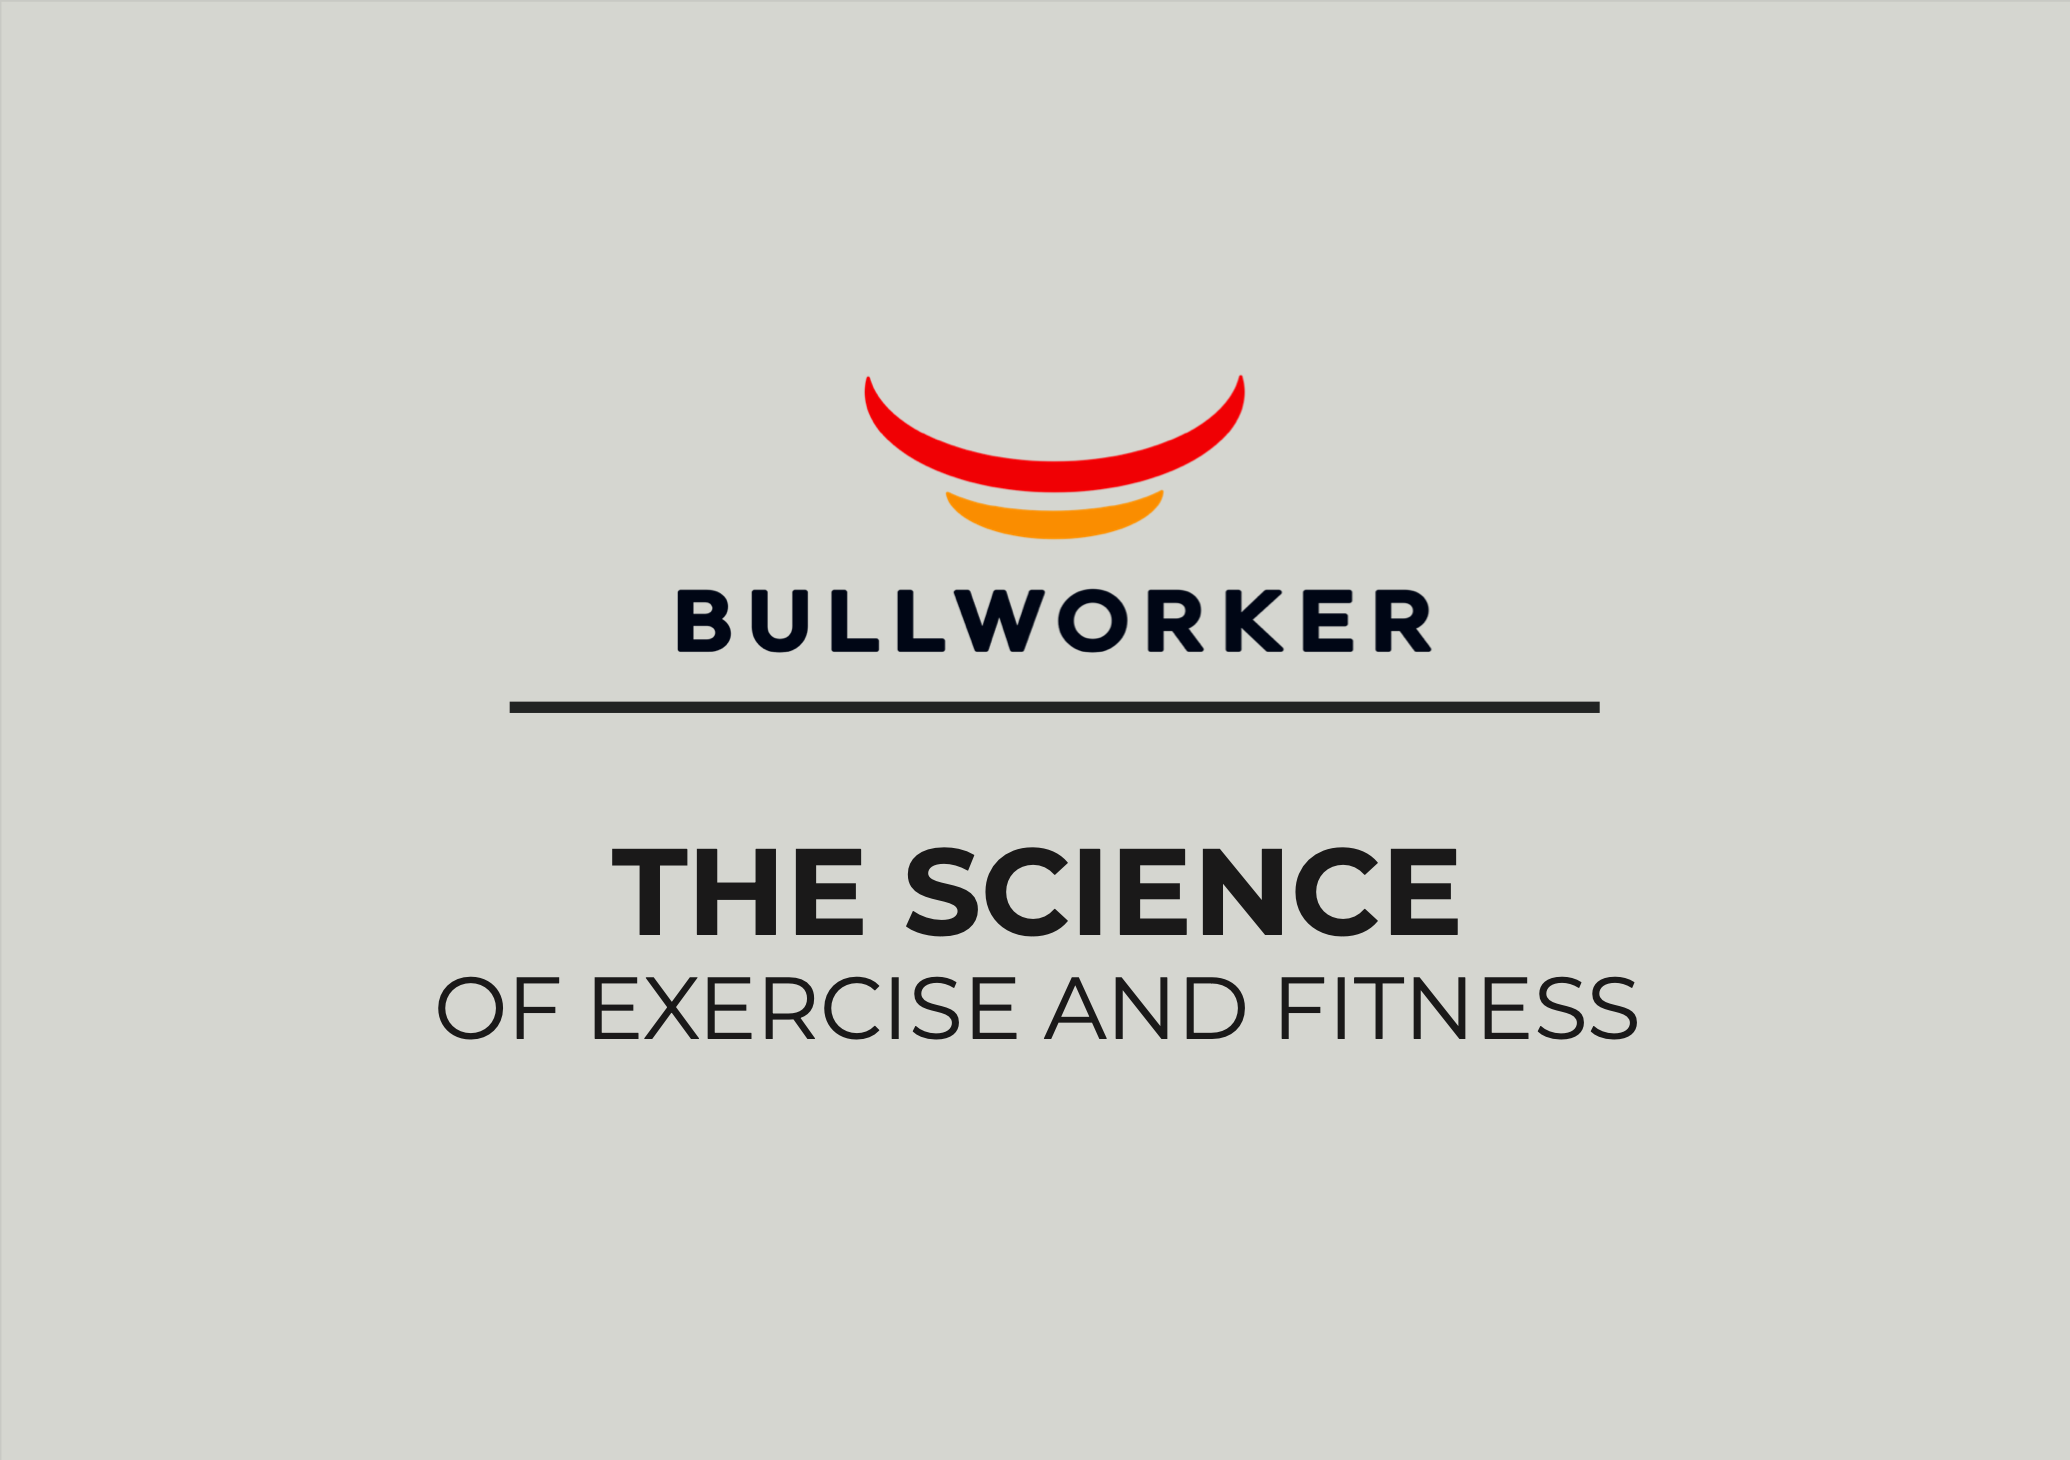 The Science of Exercise and Fitness